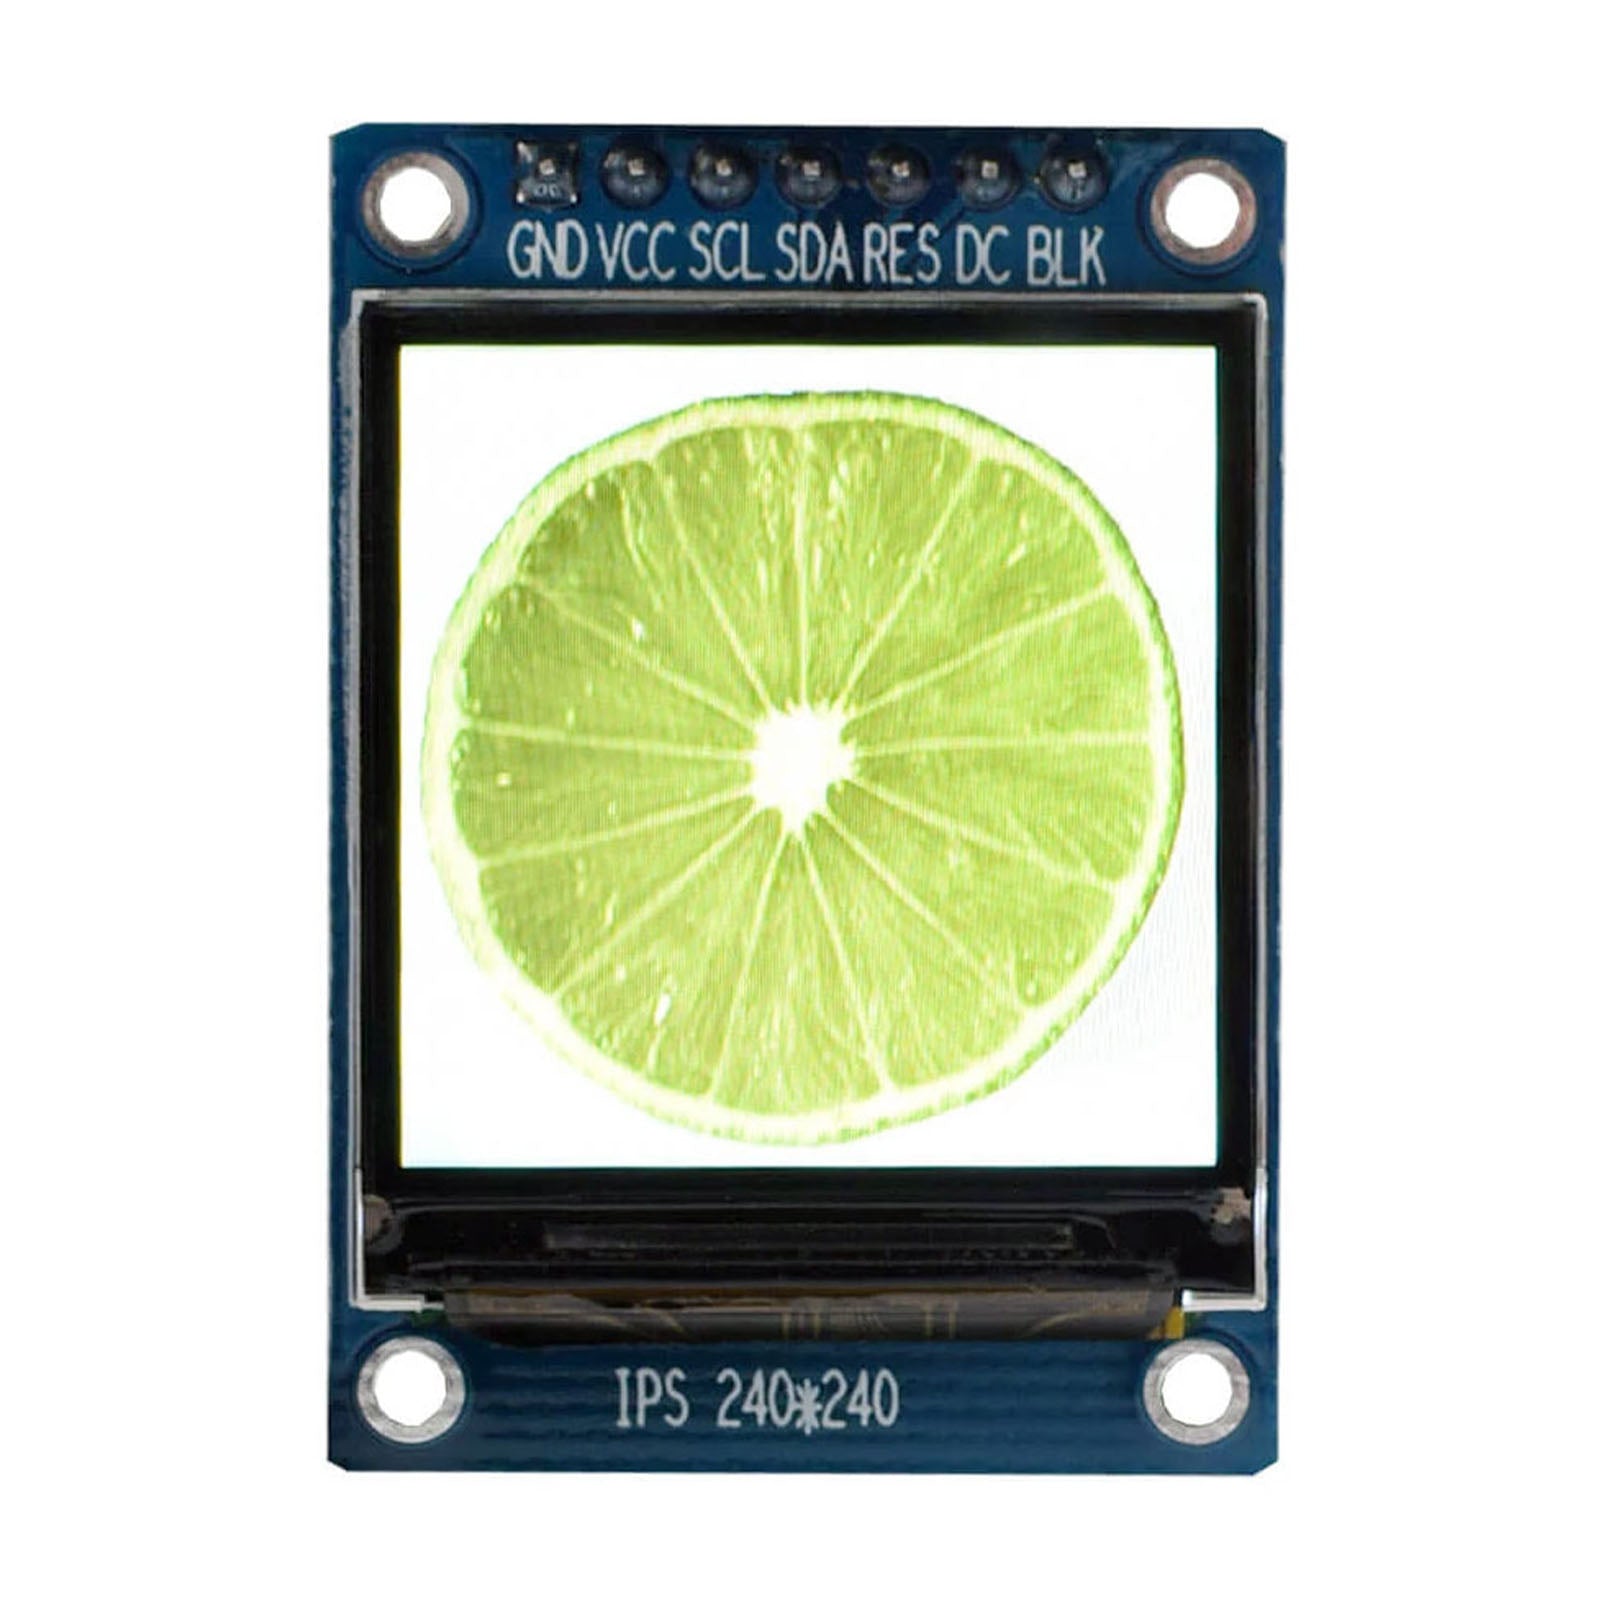 1.3-inch IPS Display Module with 240x240 resolution and SPI interface